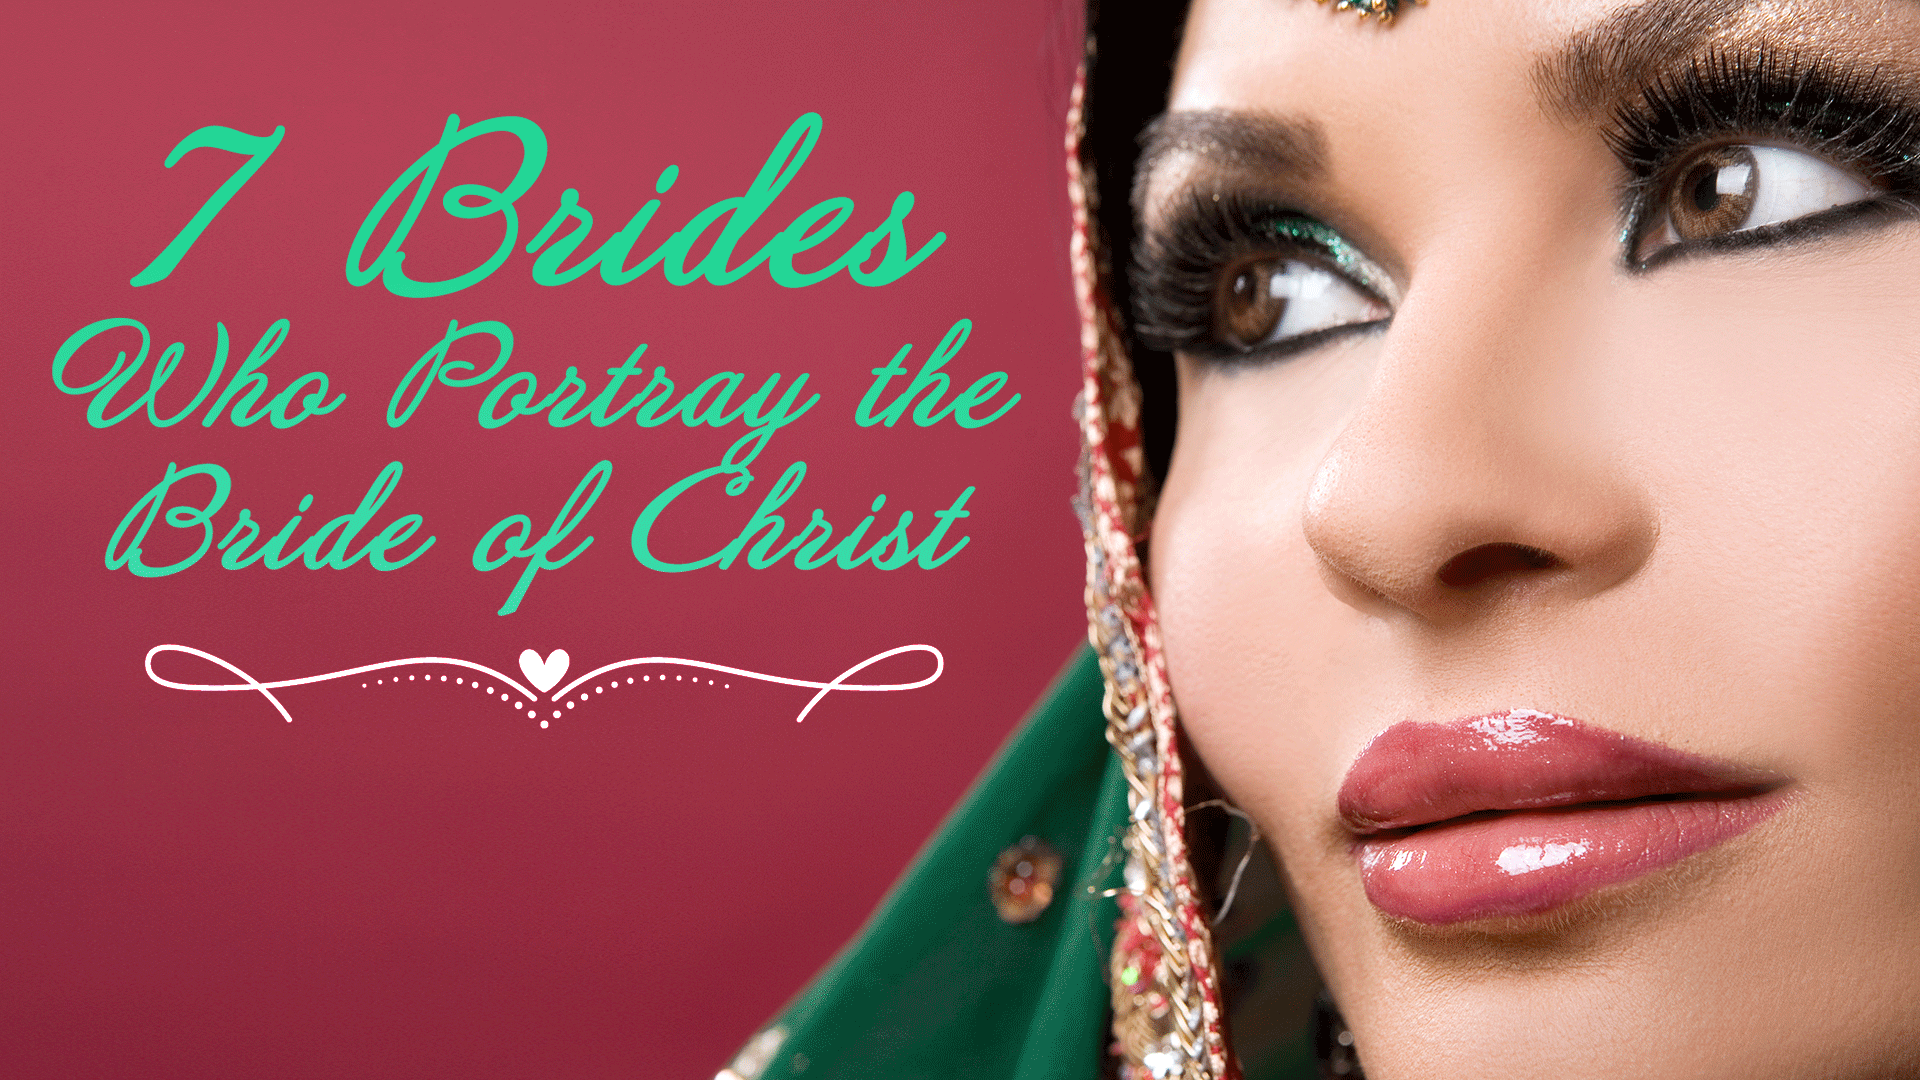 7 Brides Who Portray the Bride of Christ